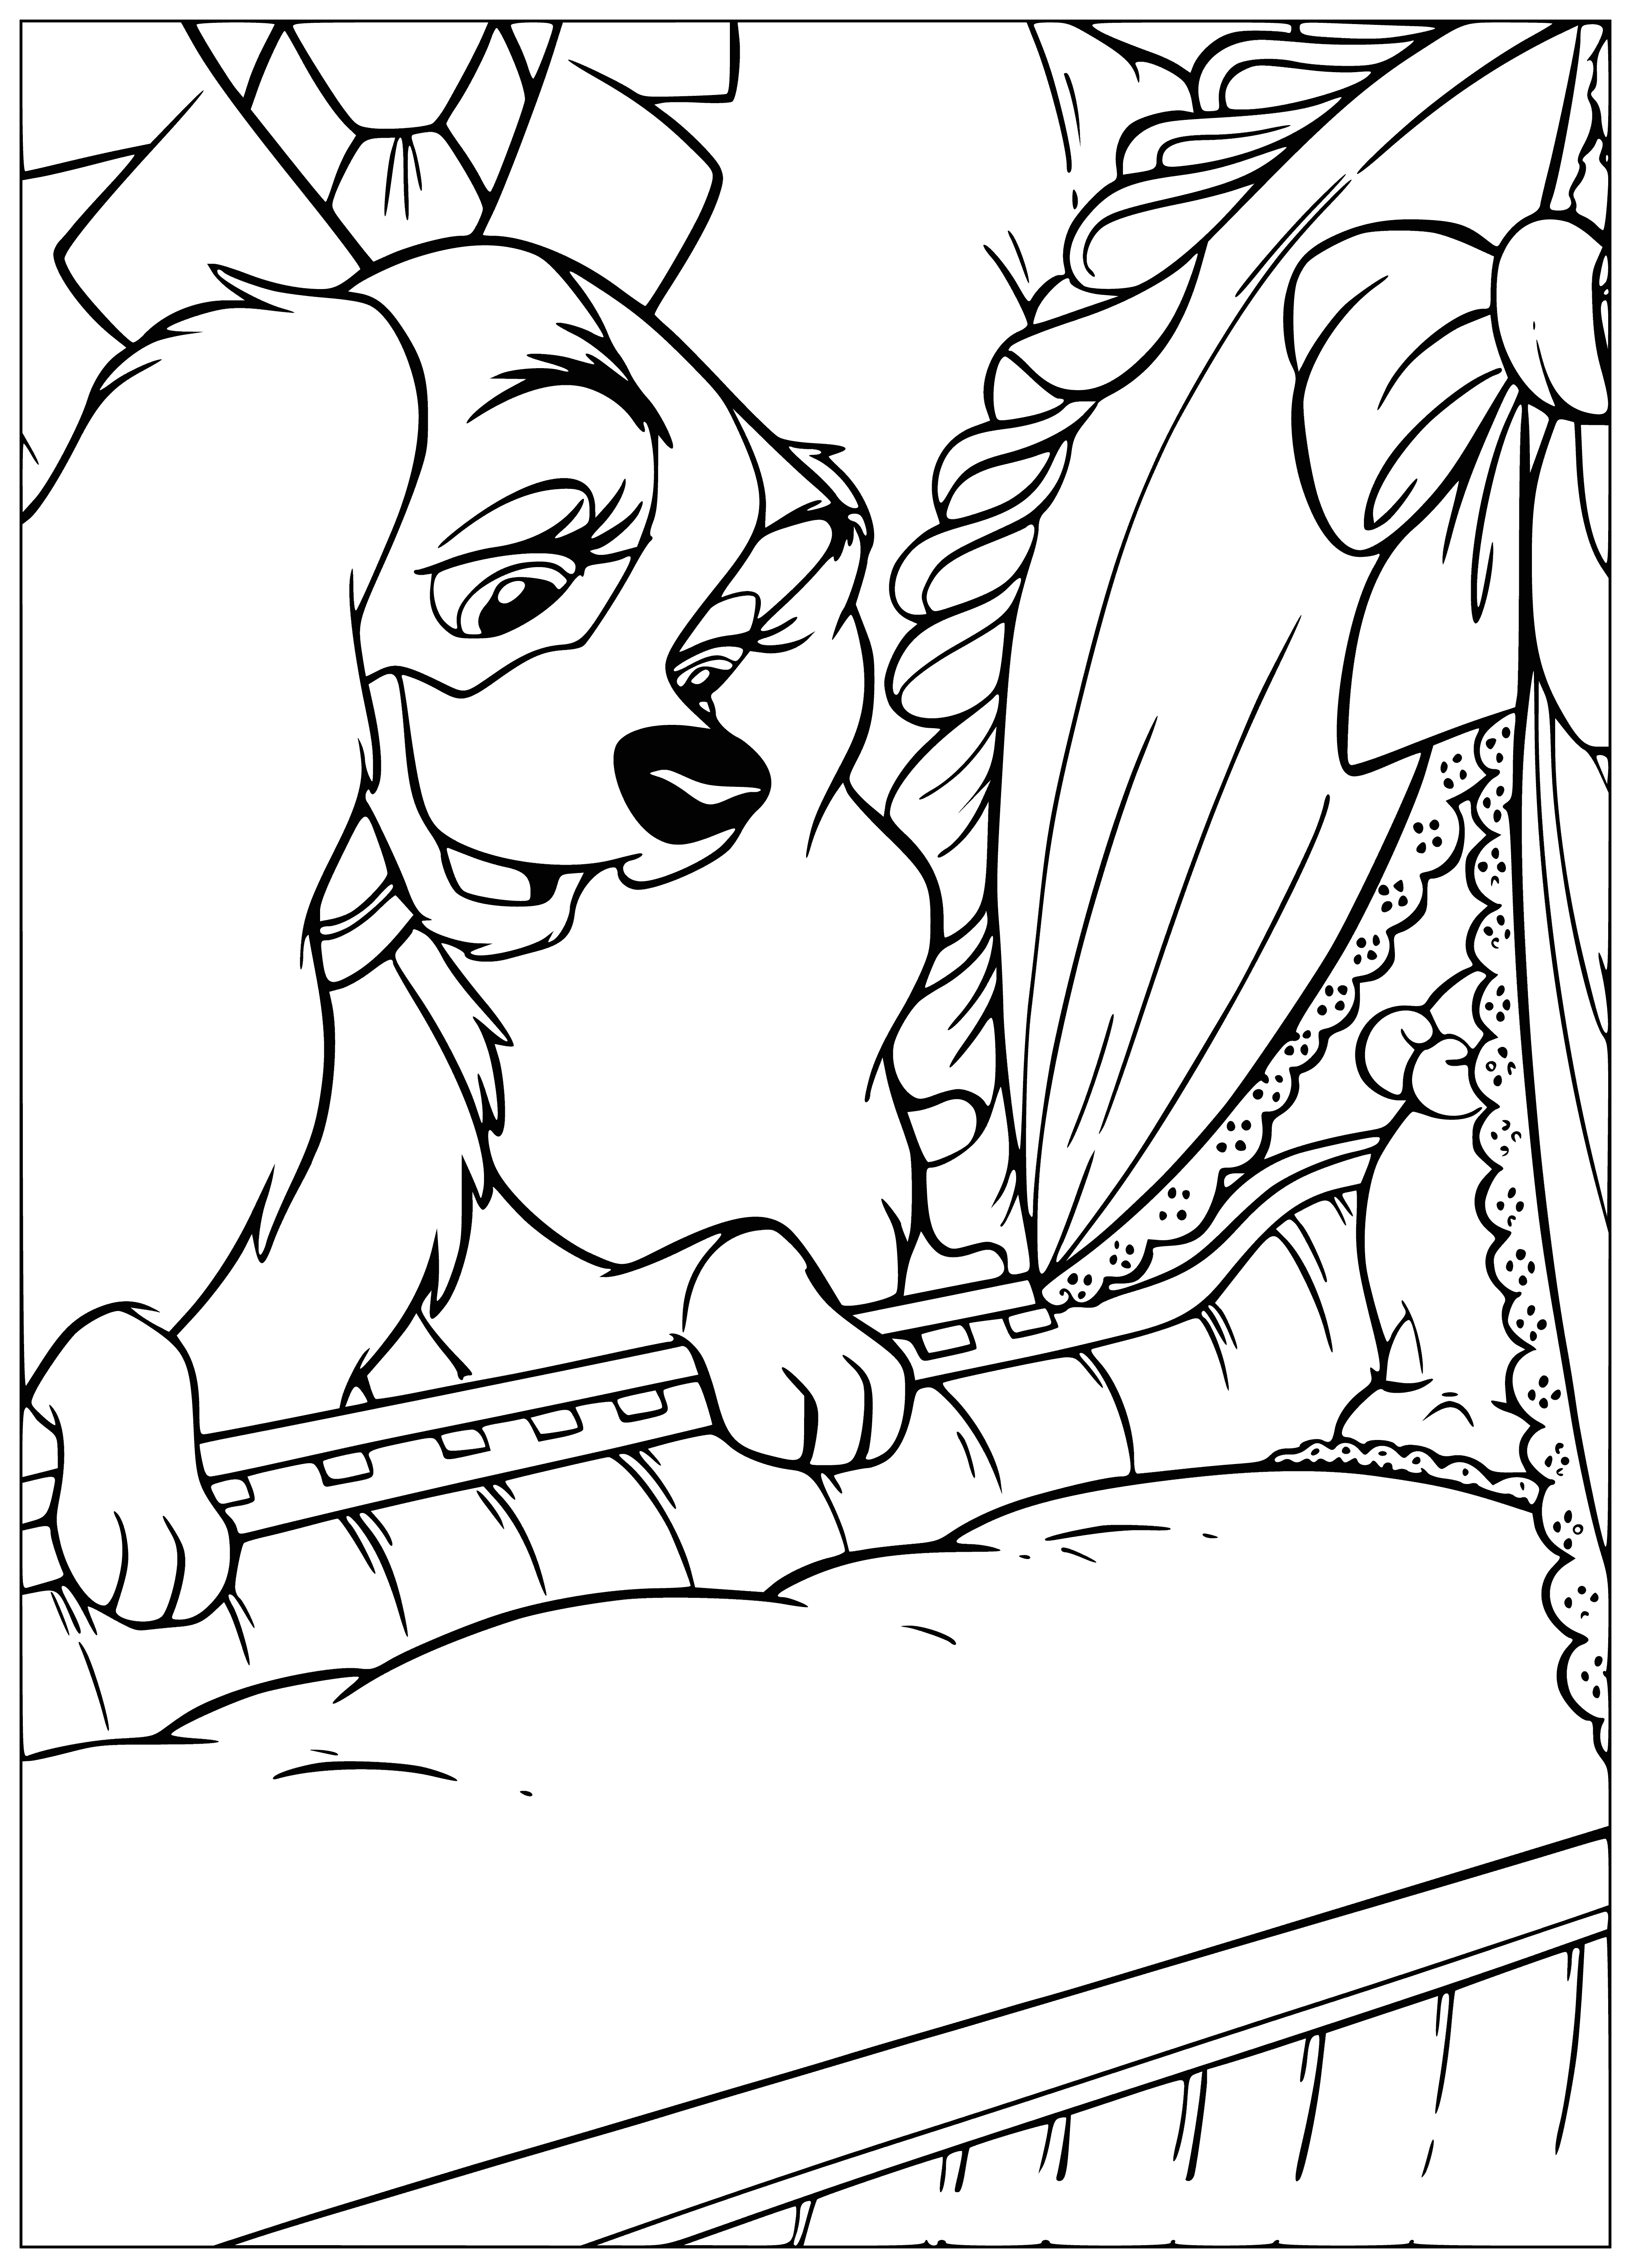 coloring page: Sleeping Lady and Tramp rest peacefully on either side of a cradle in the center of a coloring page. Both are wearing nightwear with long blonde and short brown hair, respectively. #classics #coloring #animation